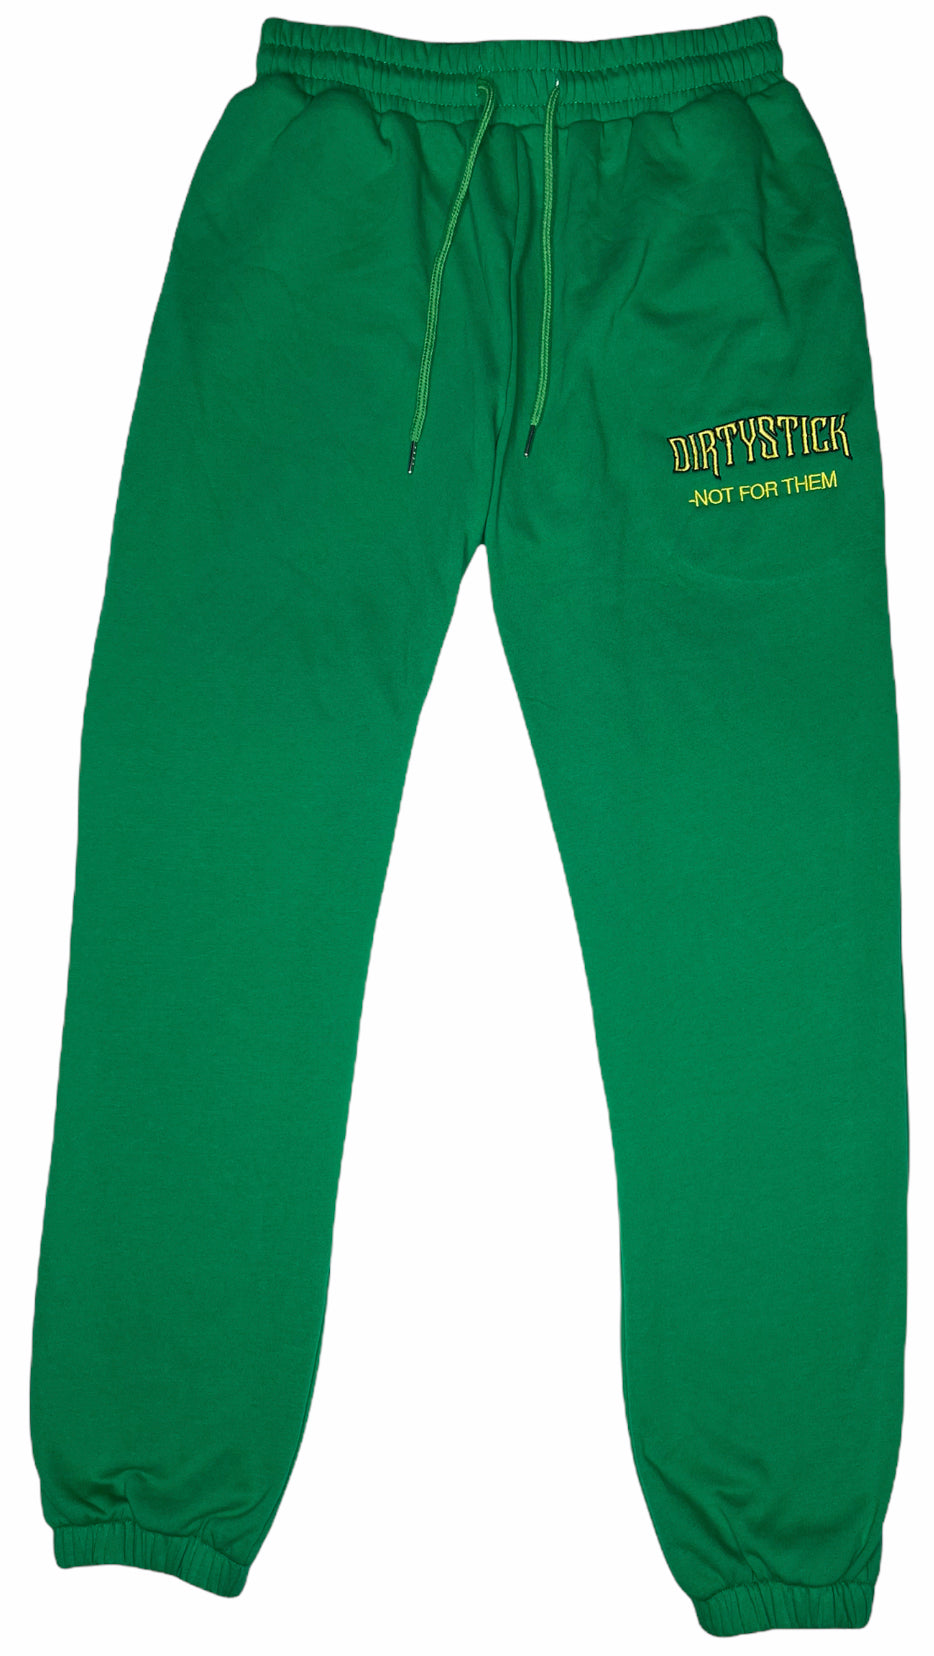 Sweat Pants/Not For them/Grn/Yel